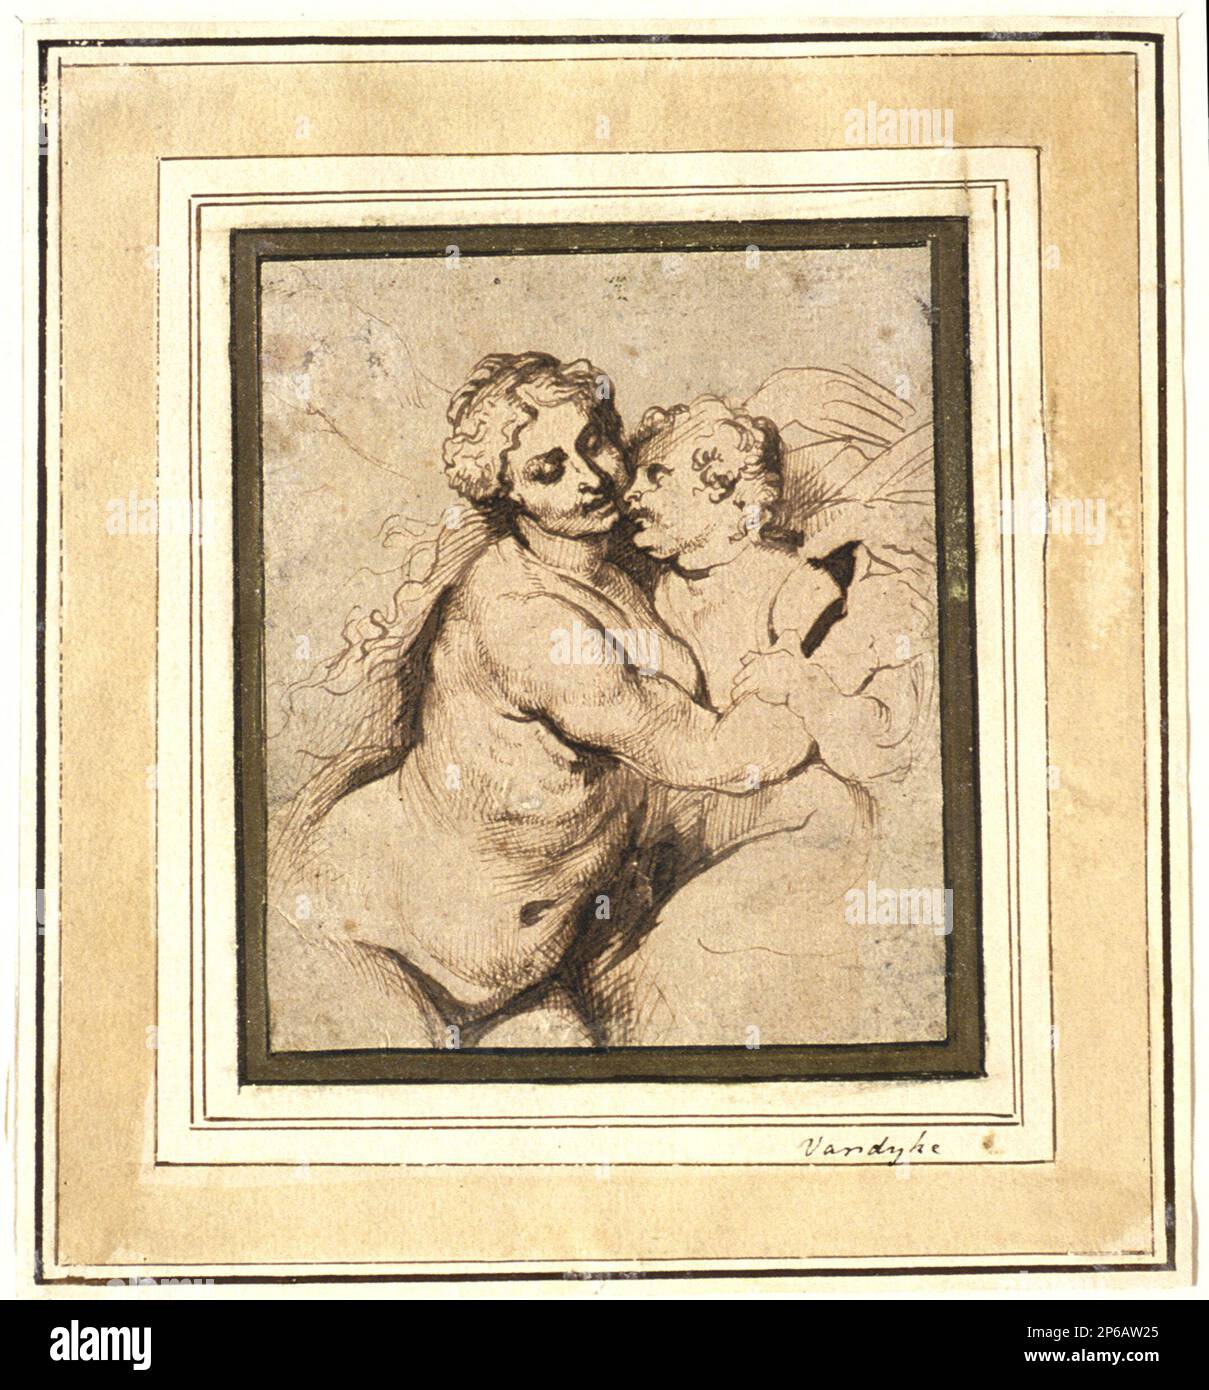 Peter Paul Rubens, Venus and Cupid, 1617–1618, pen and brown ink and gray wash on paper. Stock Photo